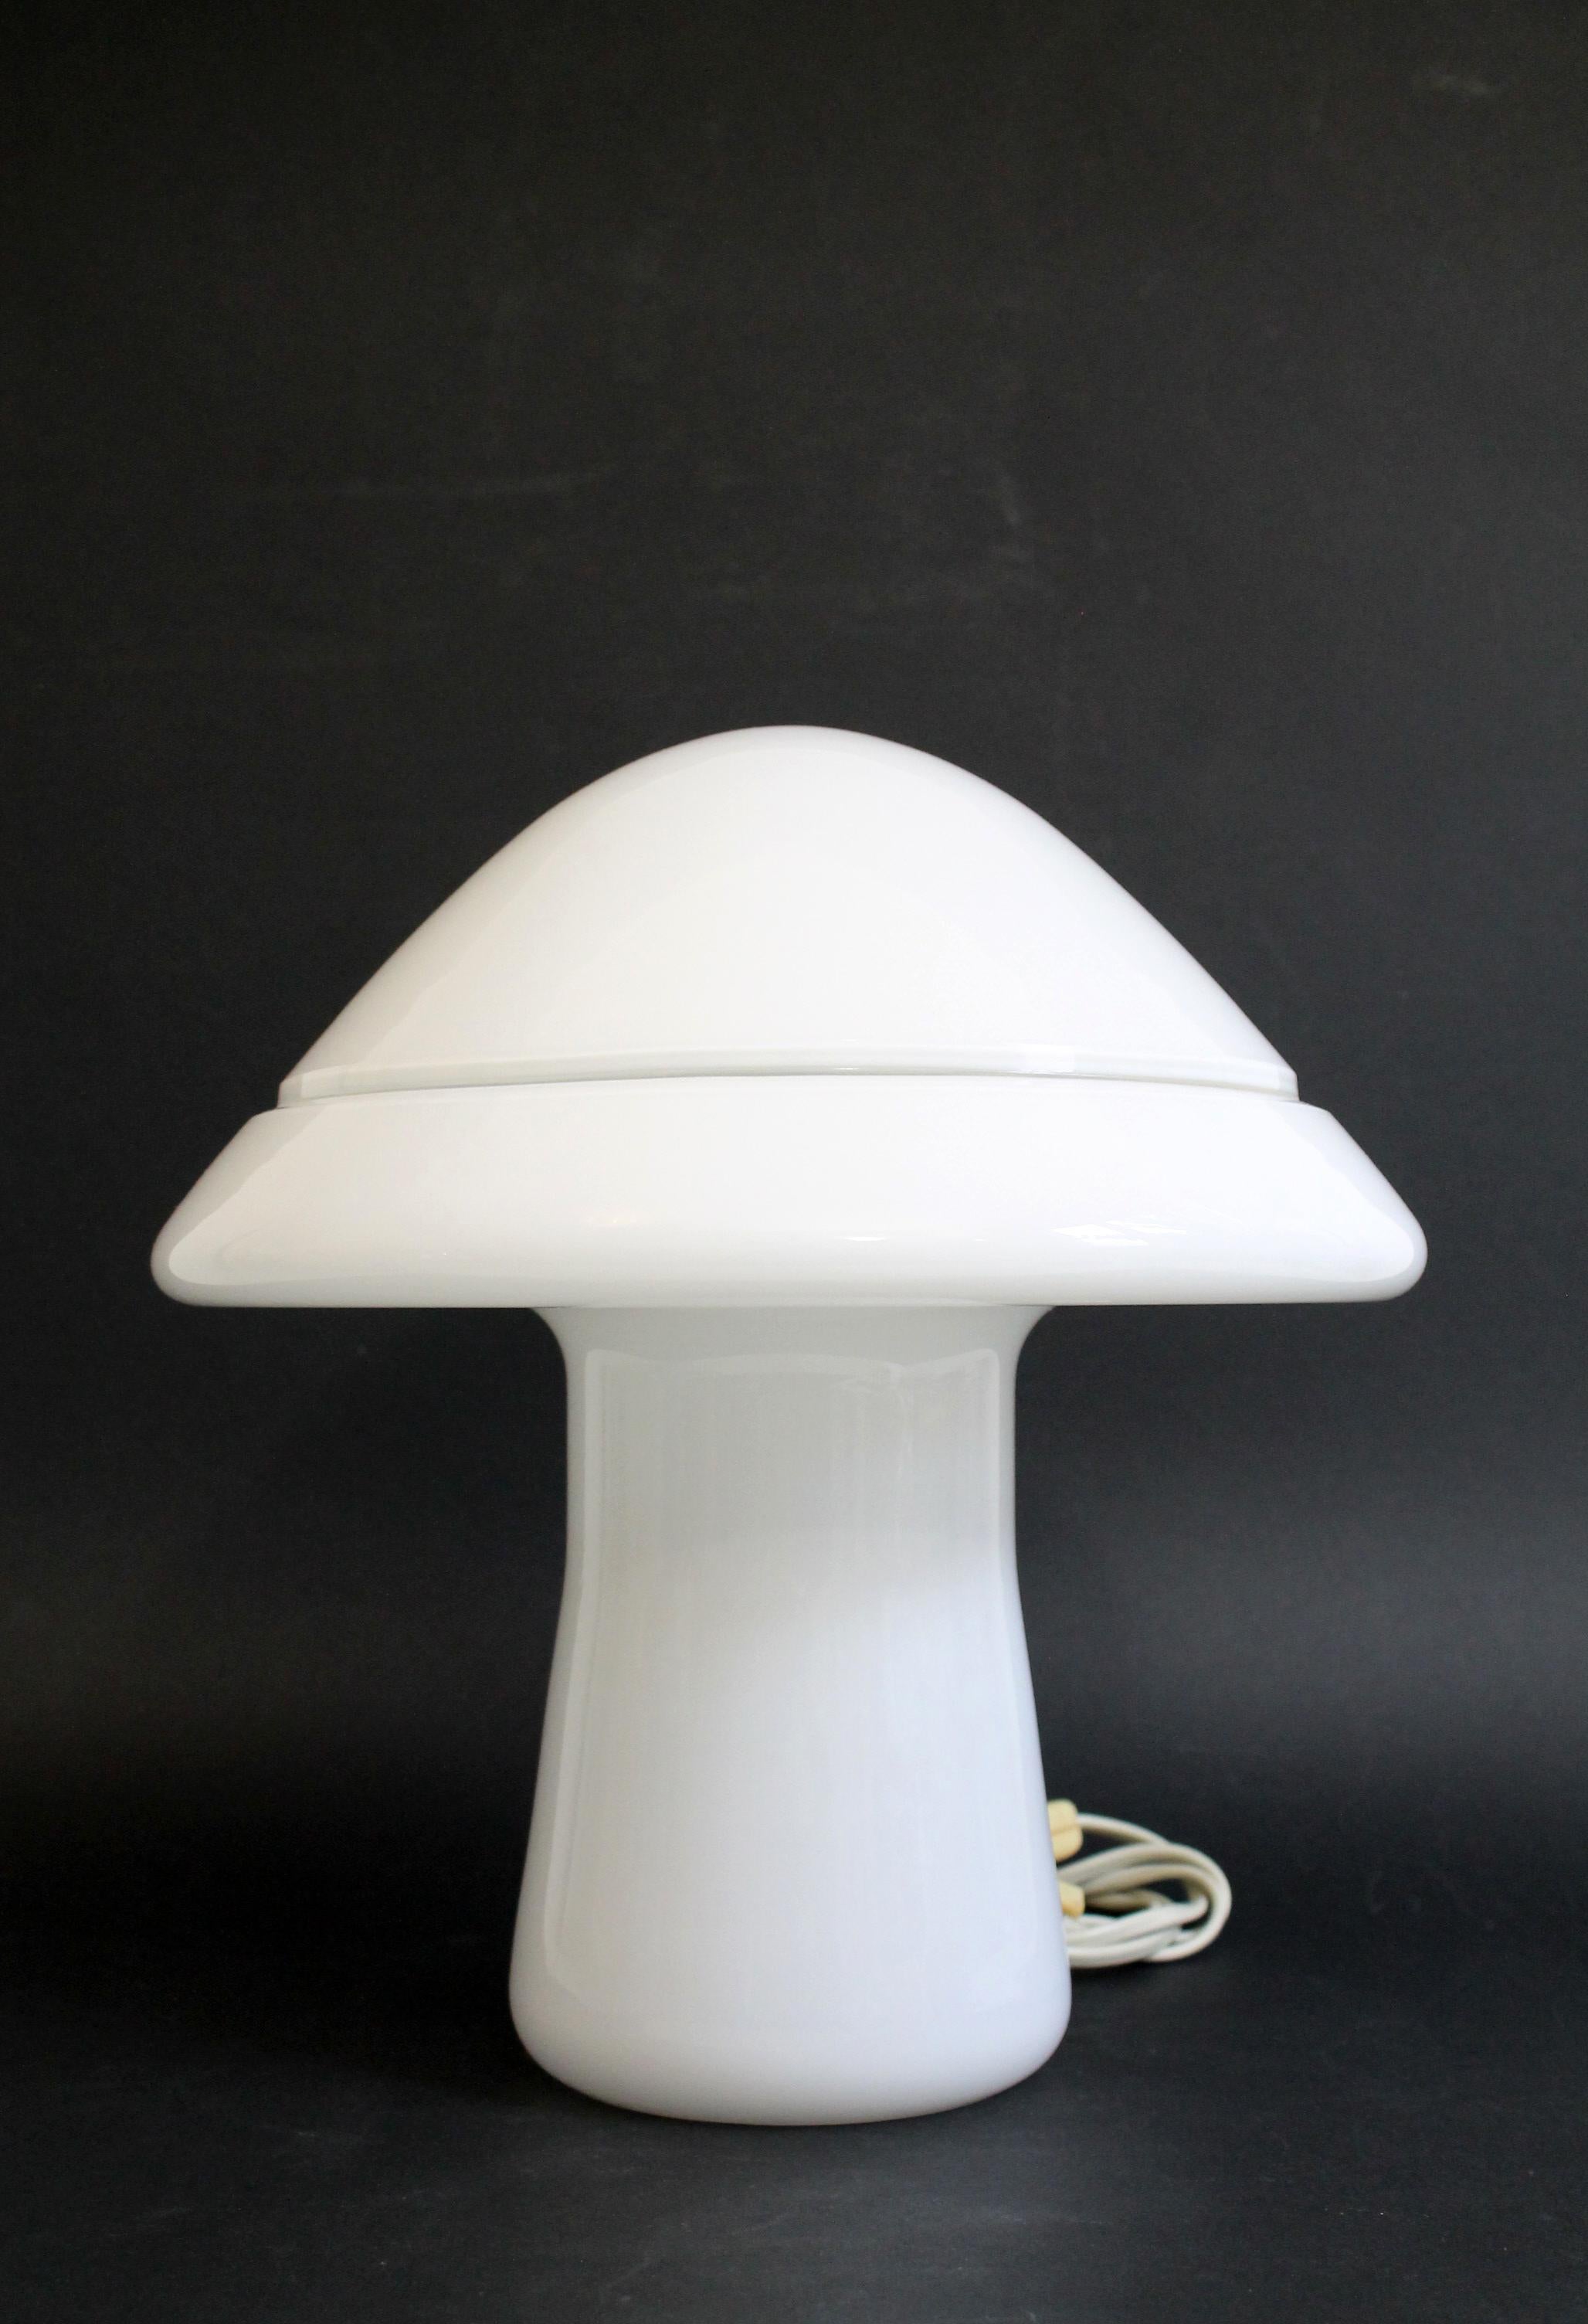 Gorgeous Medium Murano Original: RES MURANO. Made in Italy
White Glass Table Lamp from the 1970s.
The original sticker is still on it. Just perfect and ready to be enjoyed in your home
Technique: 